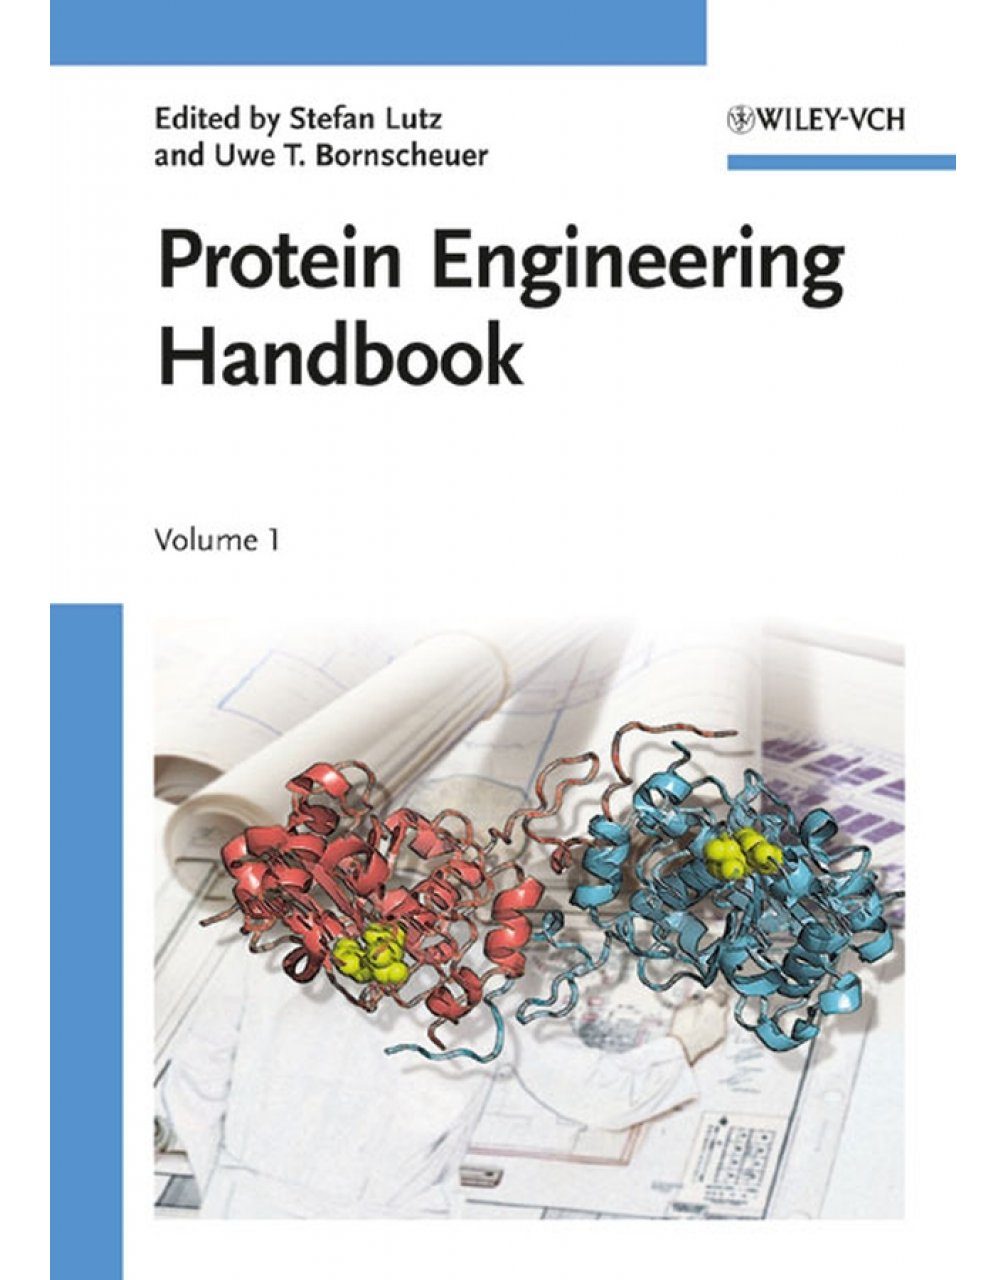 protein engineering research paper